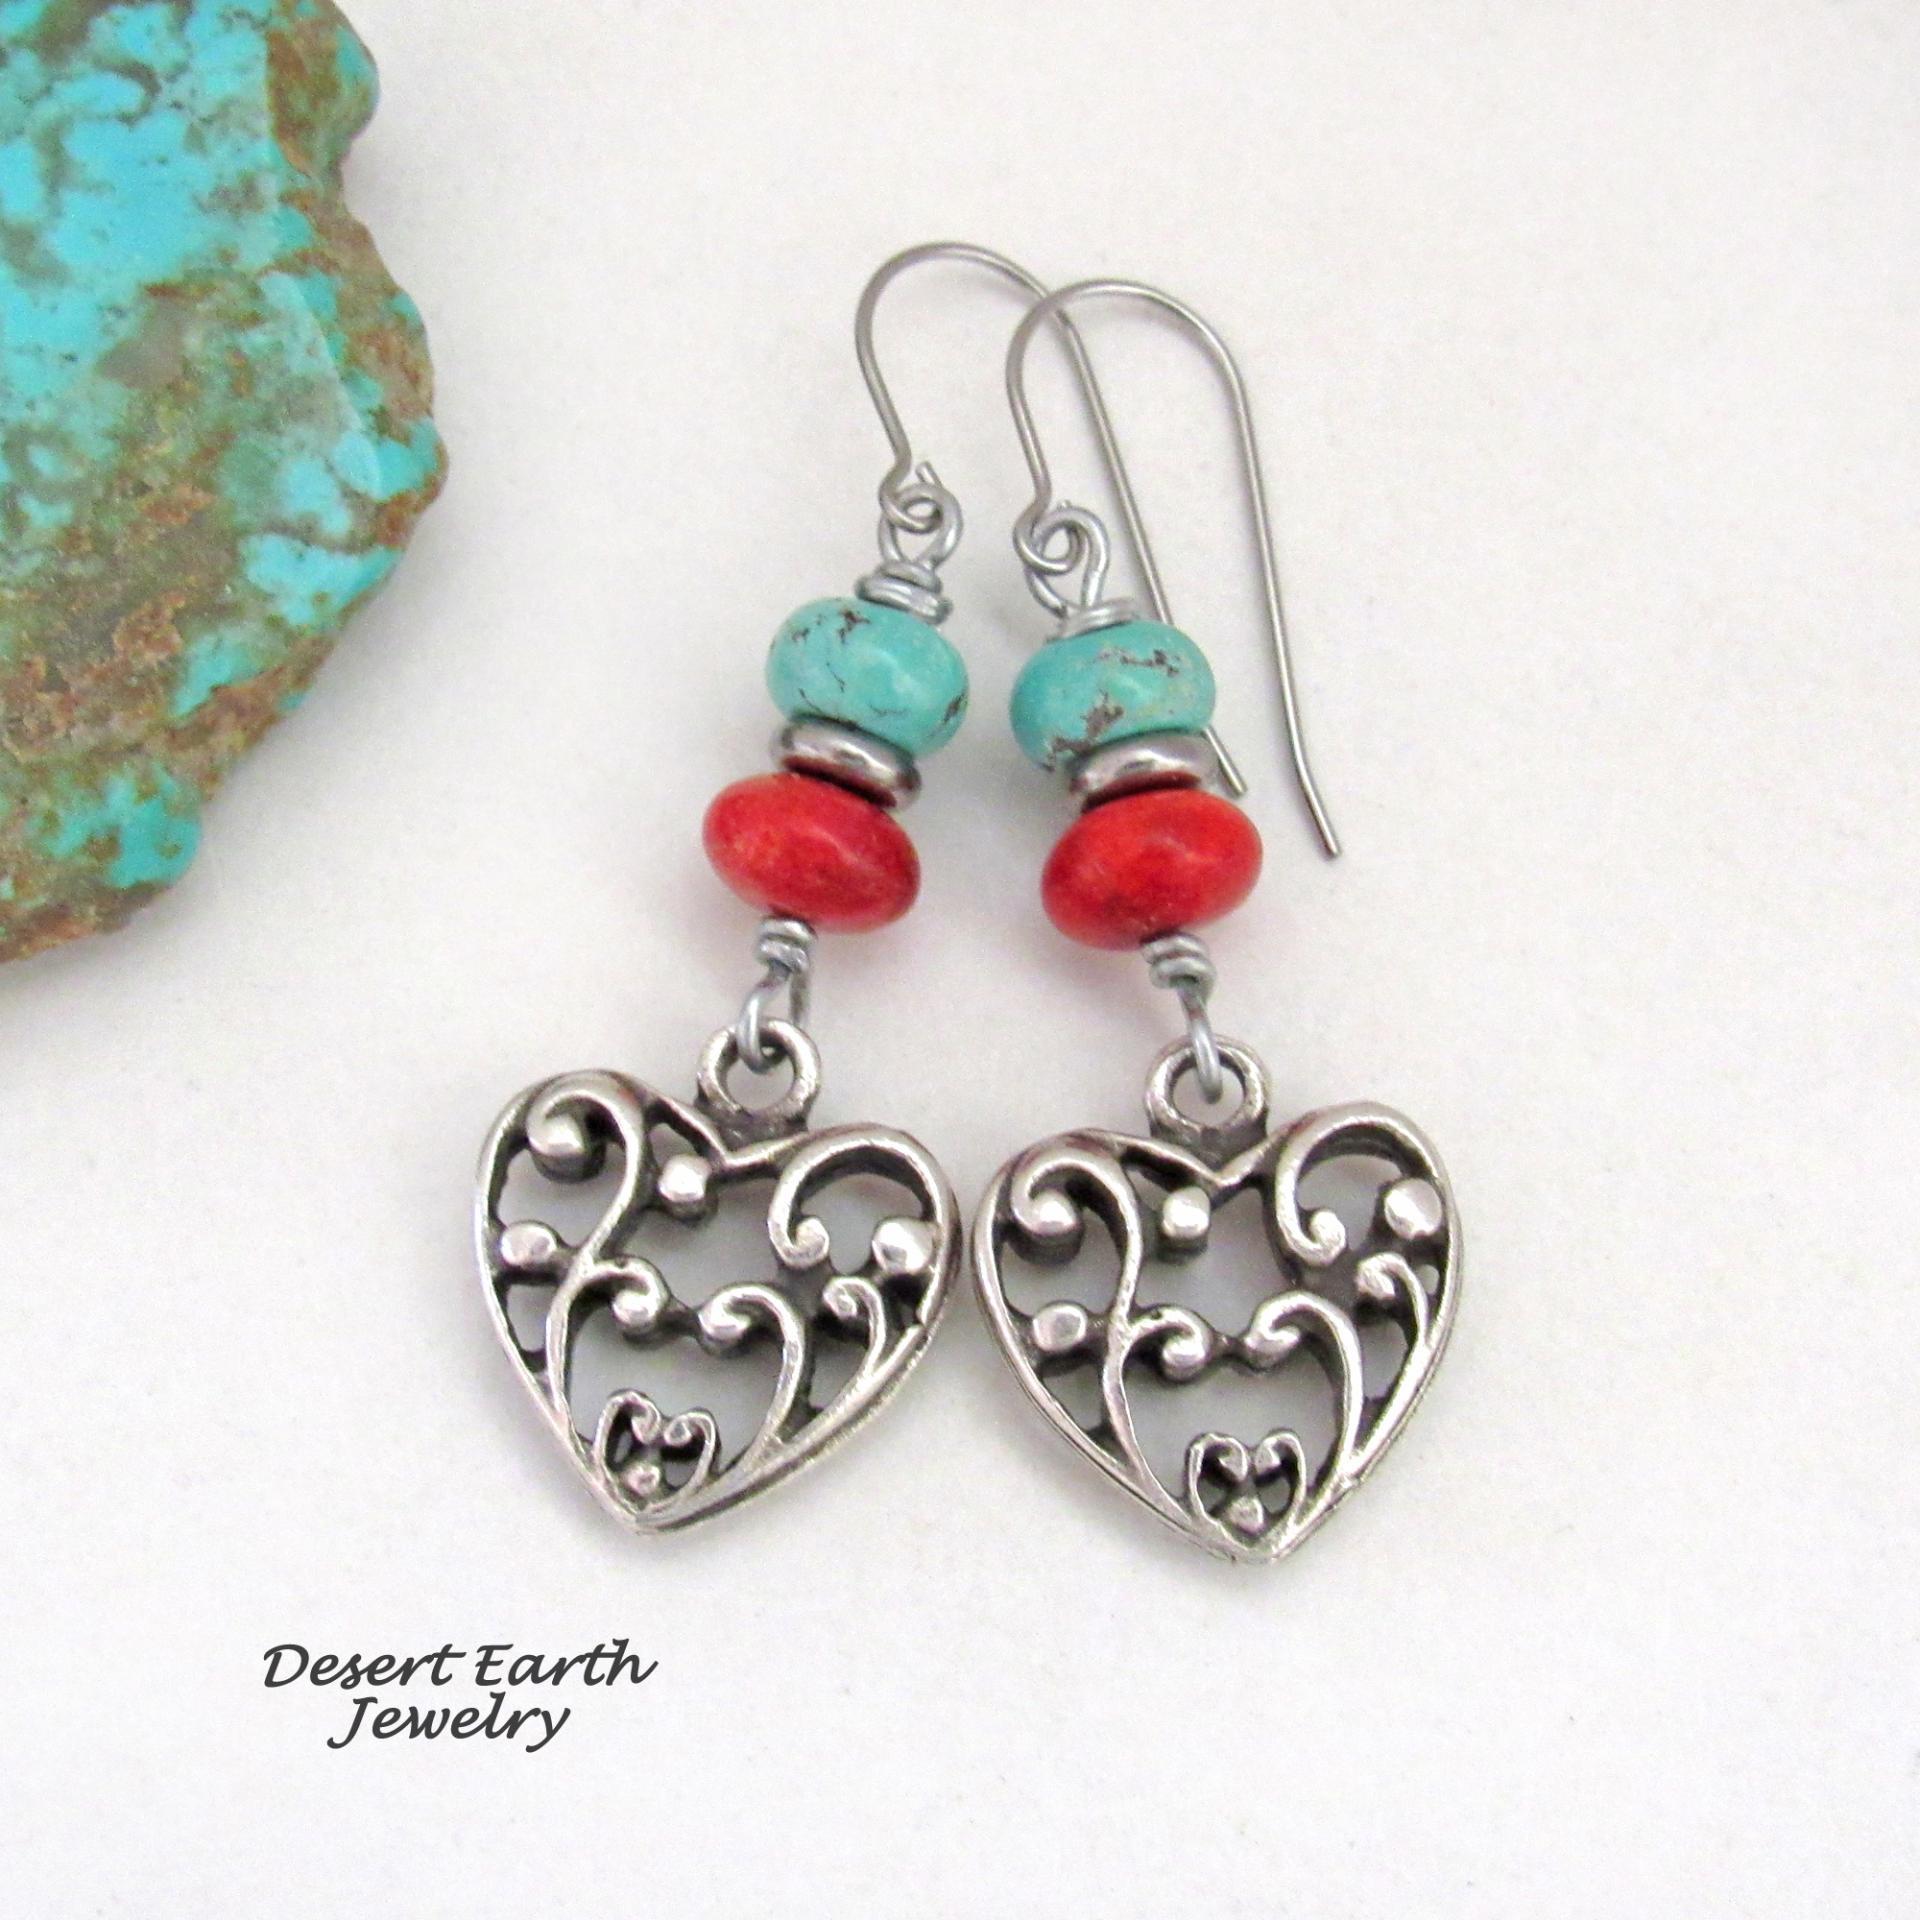 Pewter Heart Filigree Earrings with Turquoise and Red Coral - Sundance Southwest Style Jewelry 